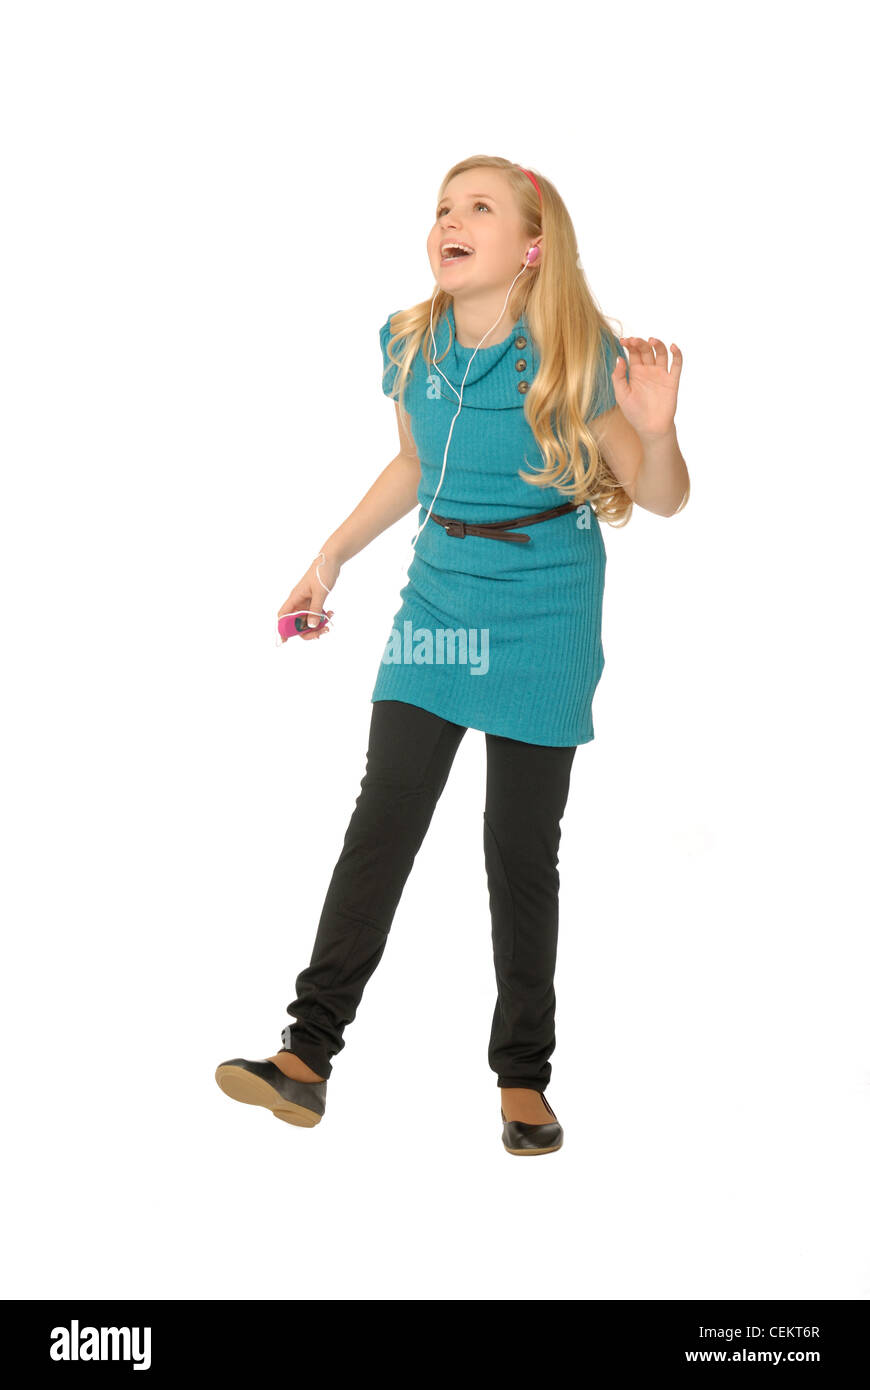 Ten year old girl wearing earbuds, listening to mp3 player and dancing. Stock Photo